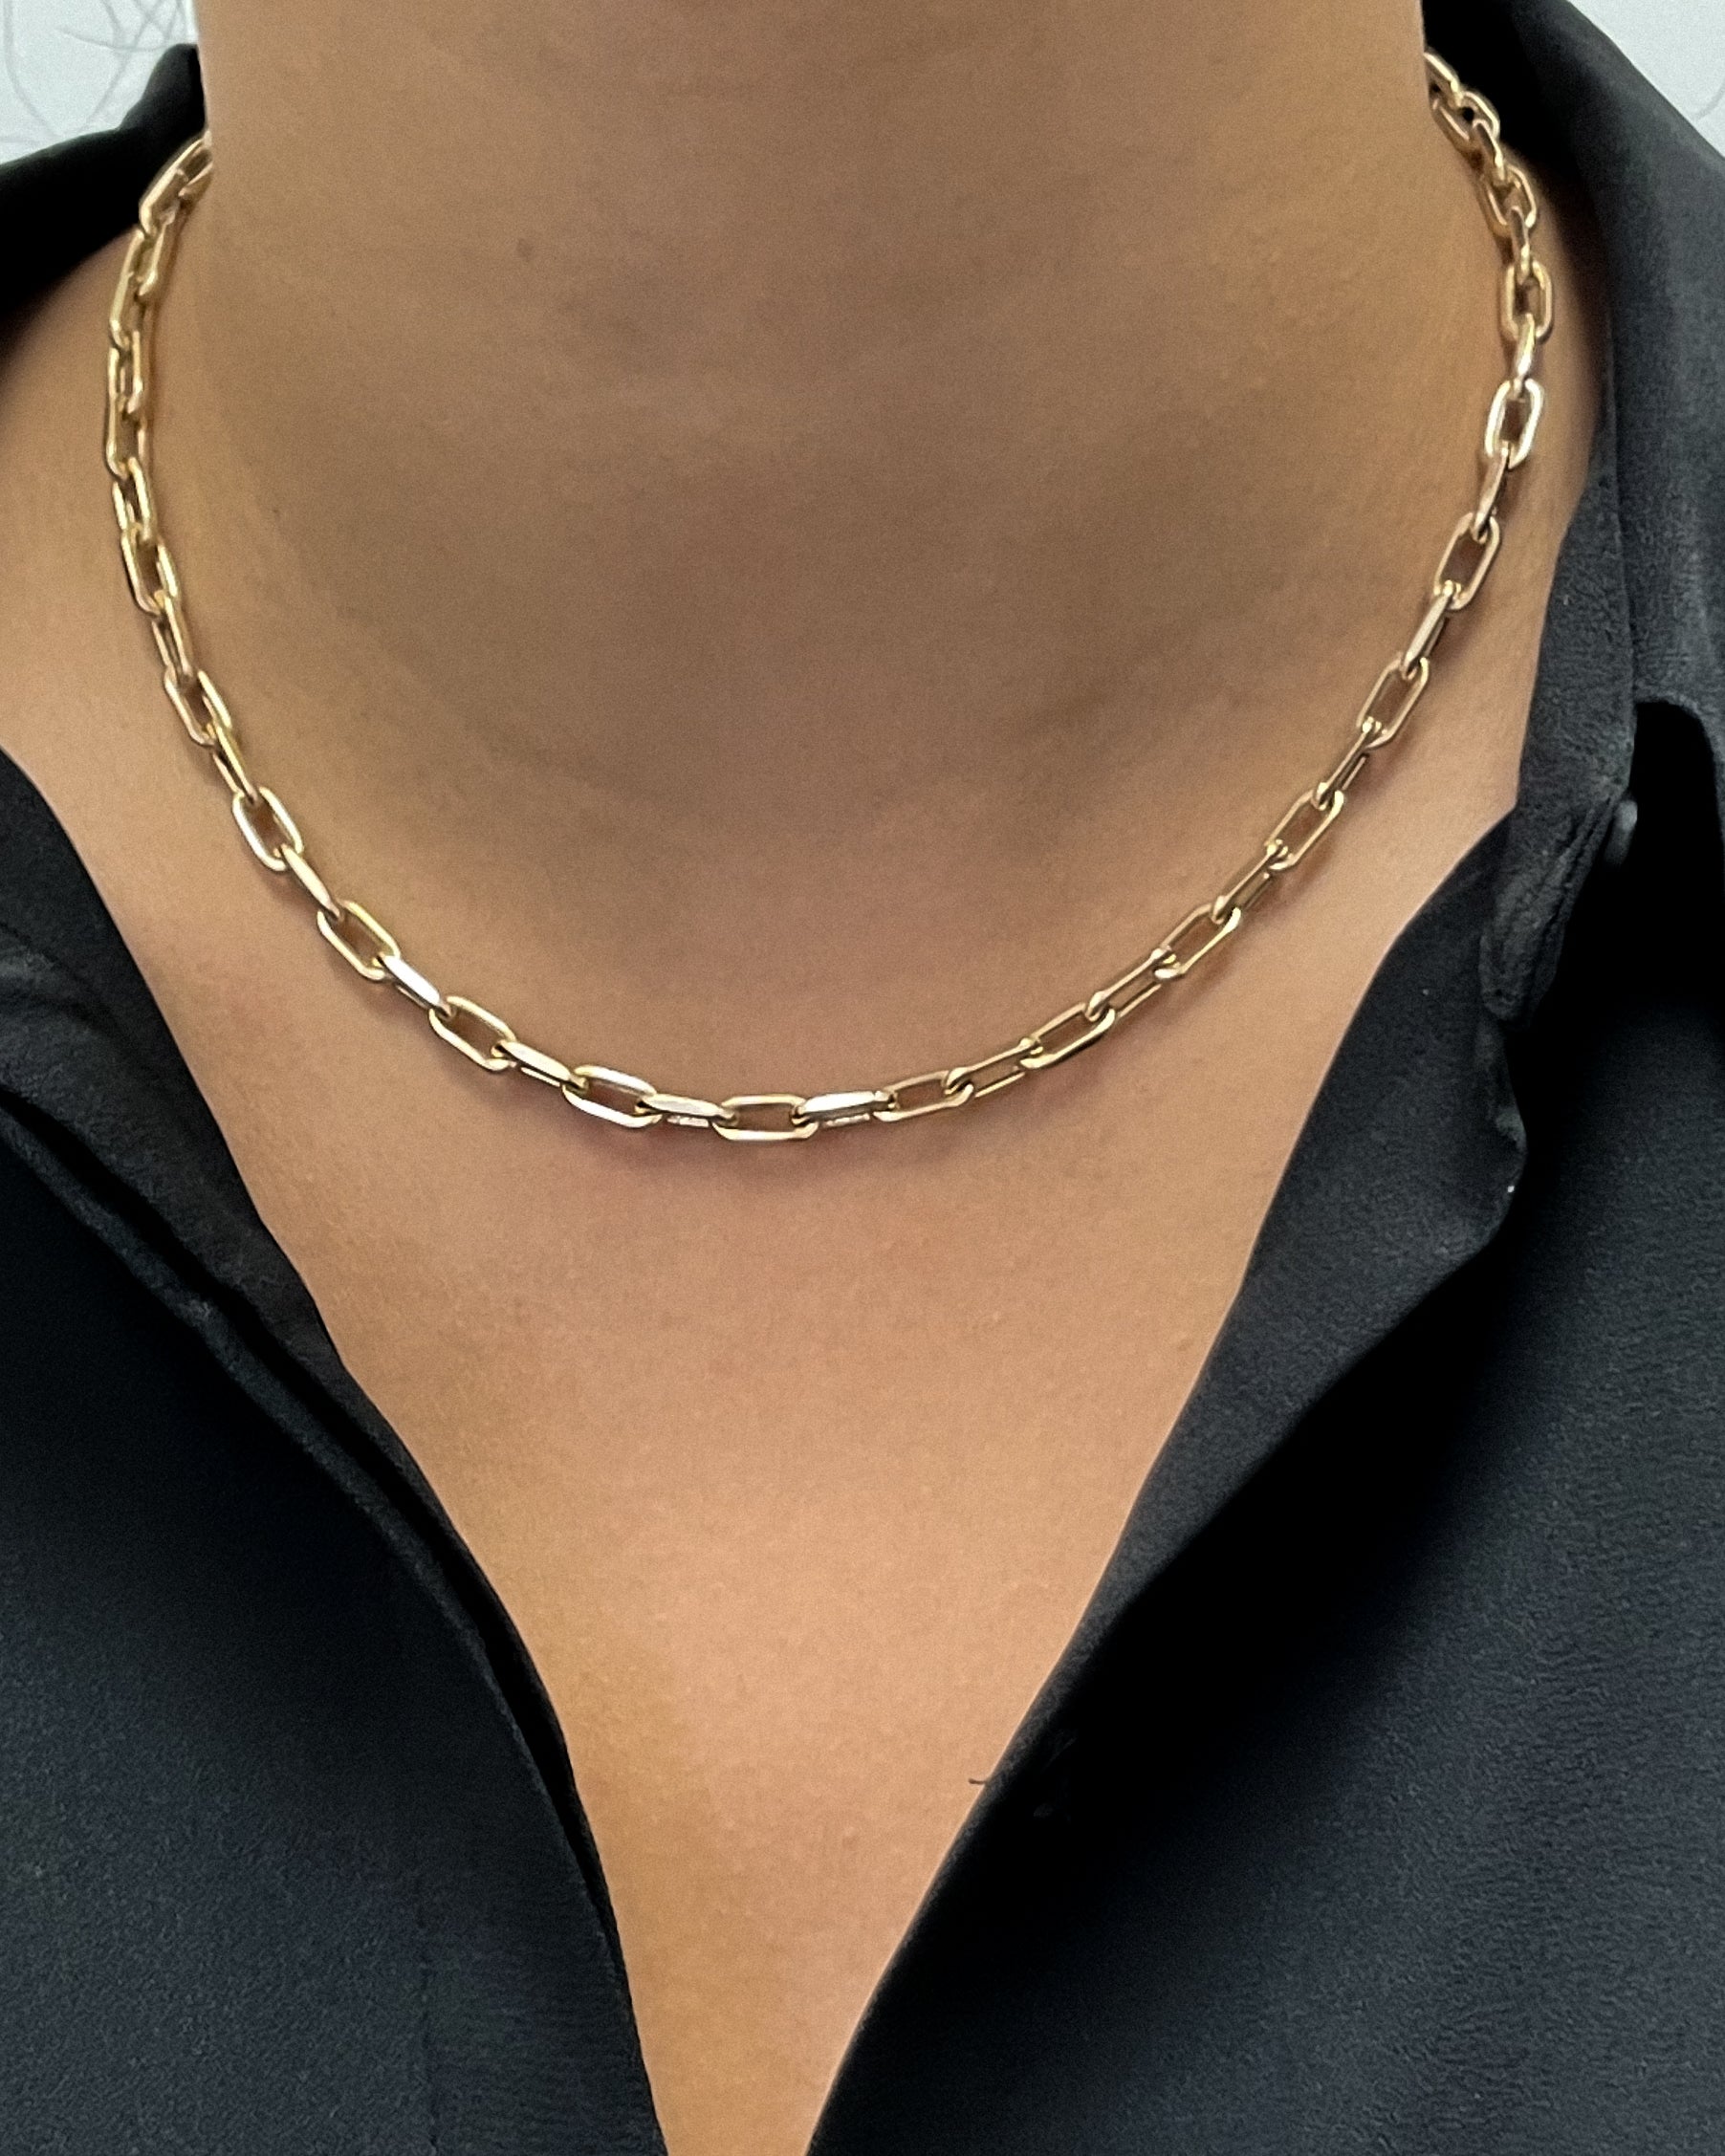 Big Gold|gold Acrylic Choker Necklace For Women - Hip Hop Chunky Link Chain